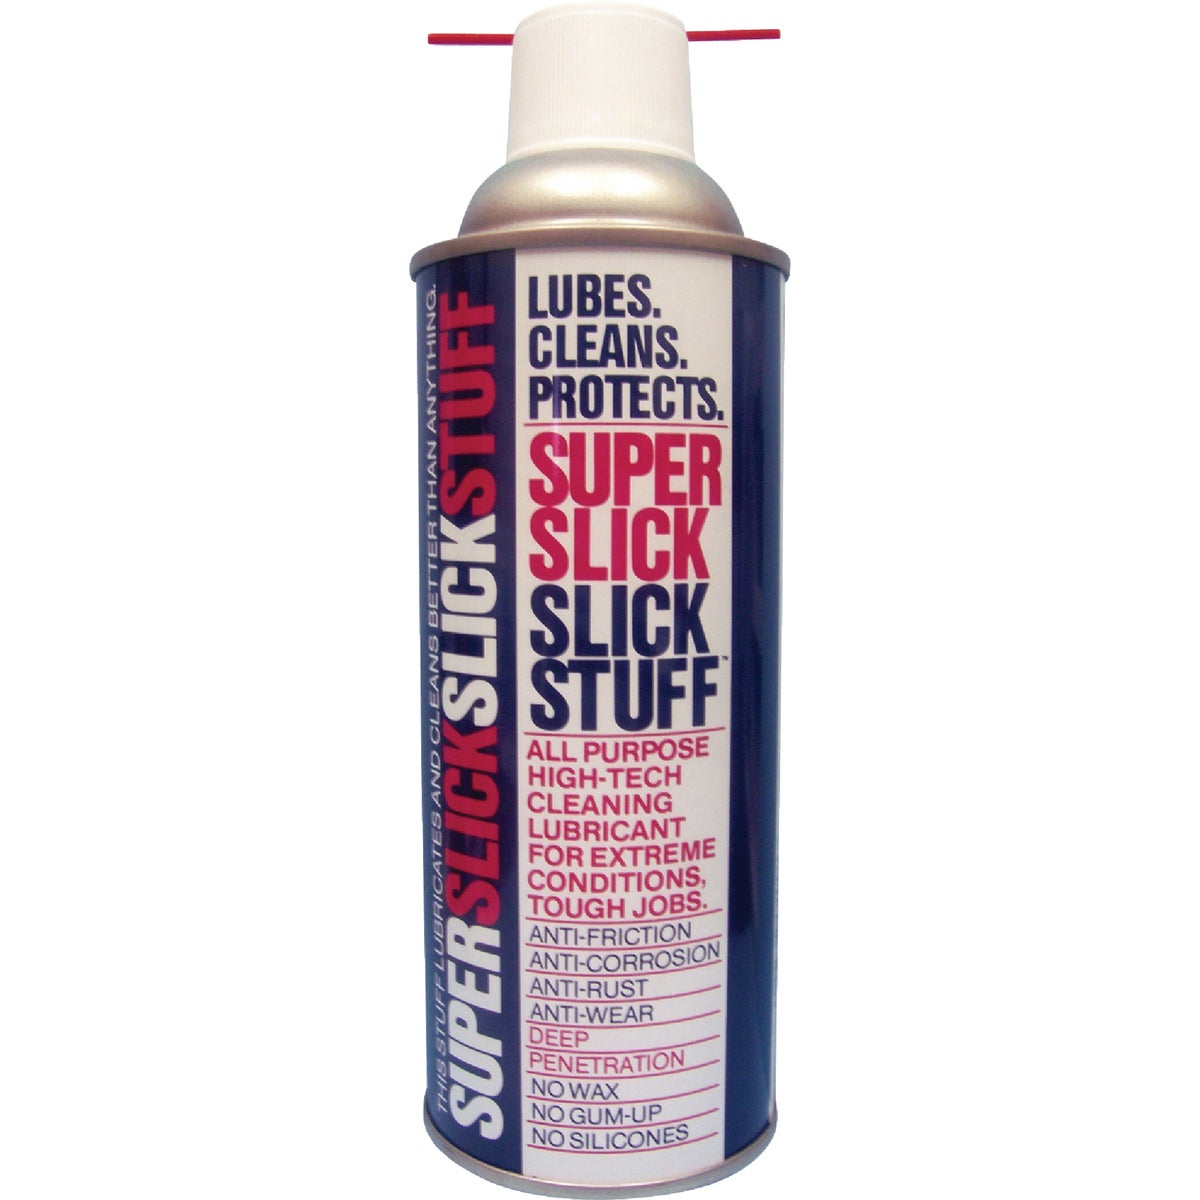 Item 610985, Super Slick is a non-petroleum based, greaseless product that lubricates, 